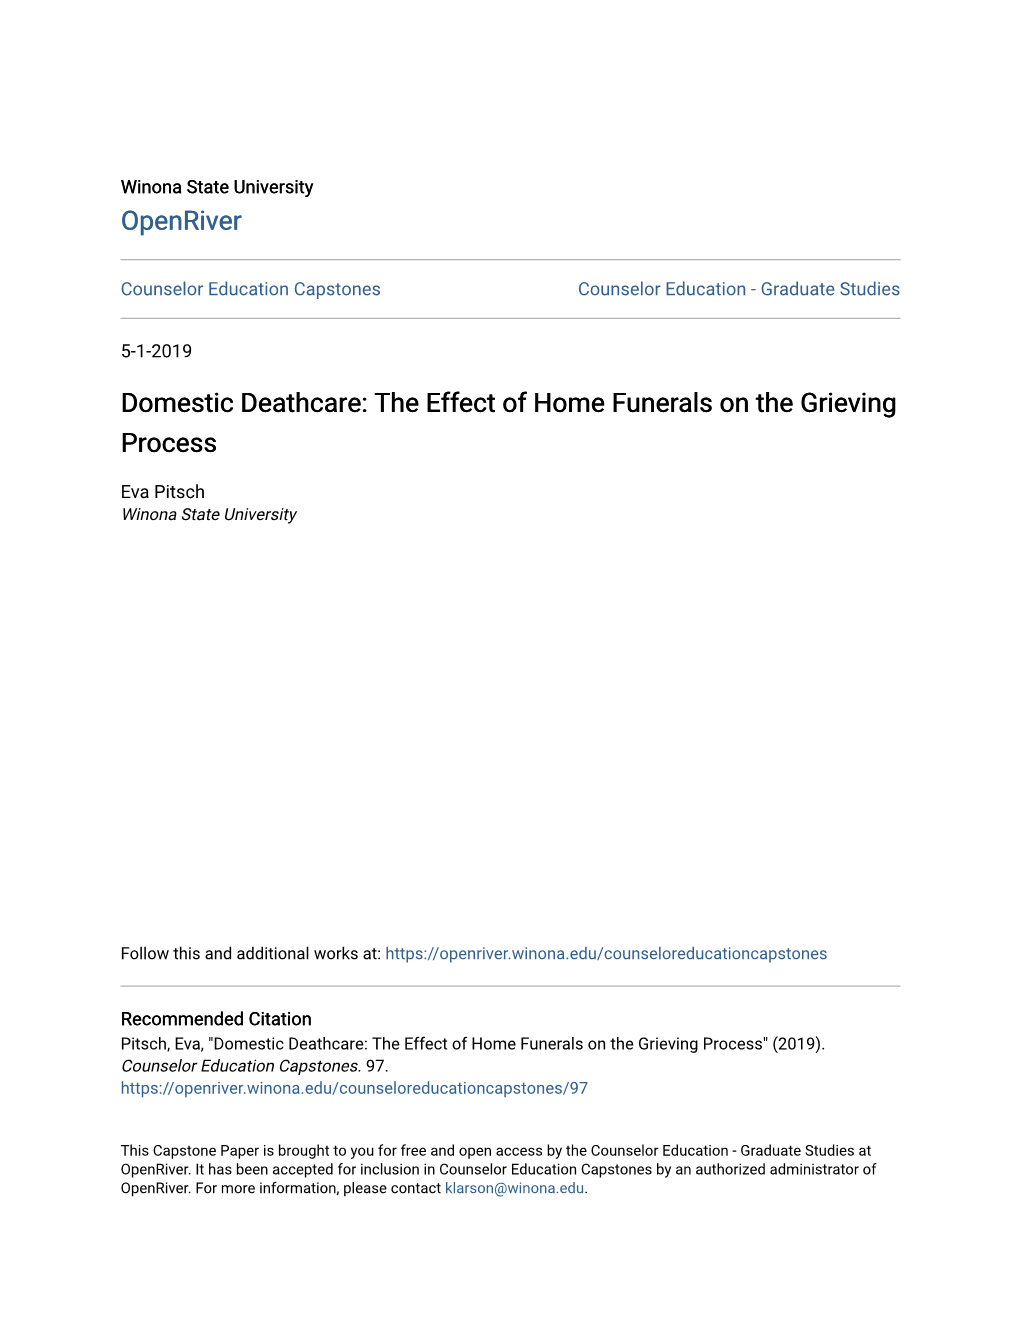 Domestic Deathcare: the Effect of Home Funerals on the Grieving Process